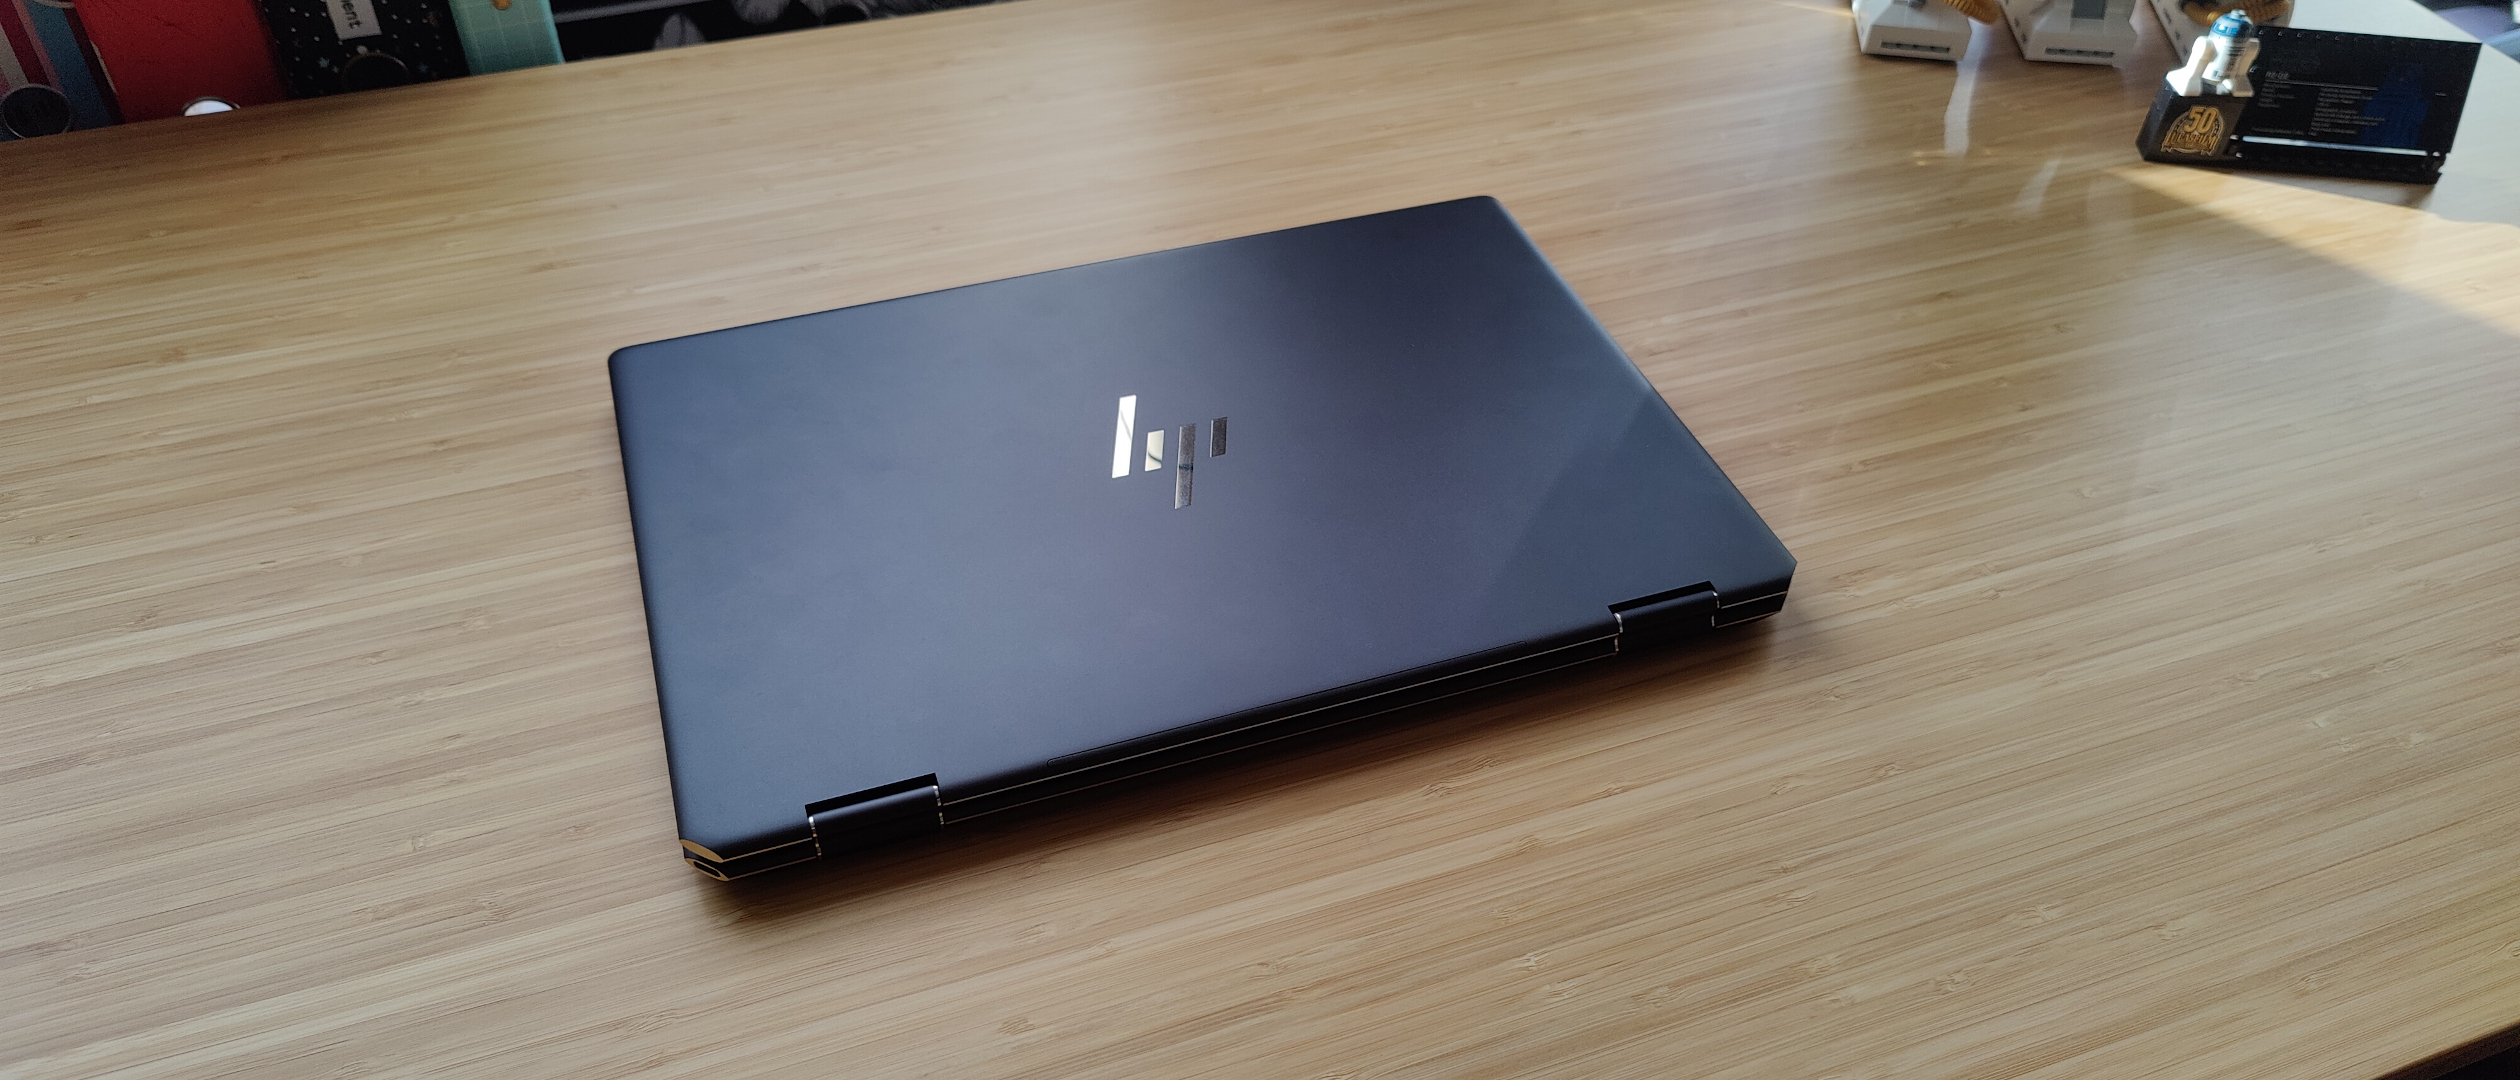 HP Spectre x360 16 review: A flipping delight